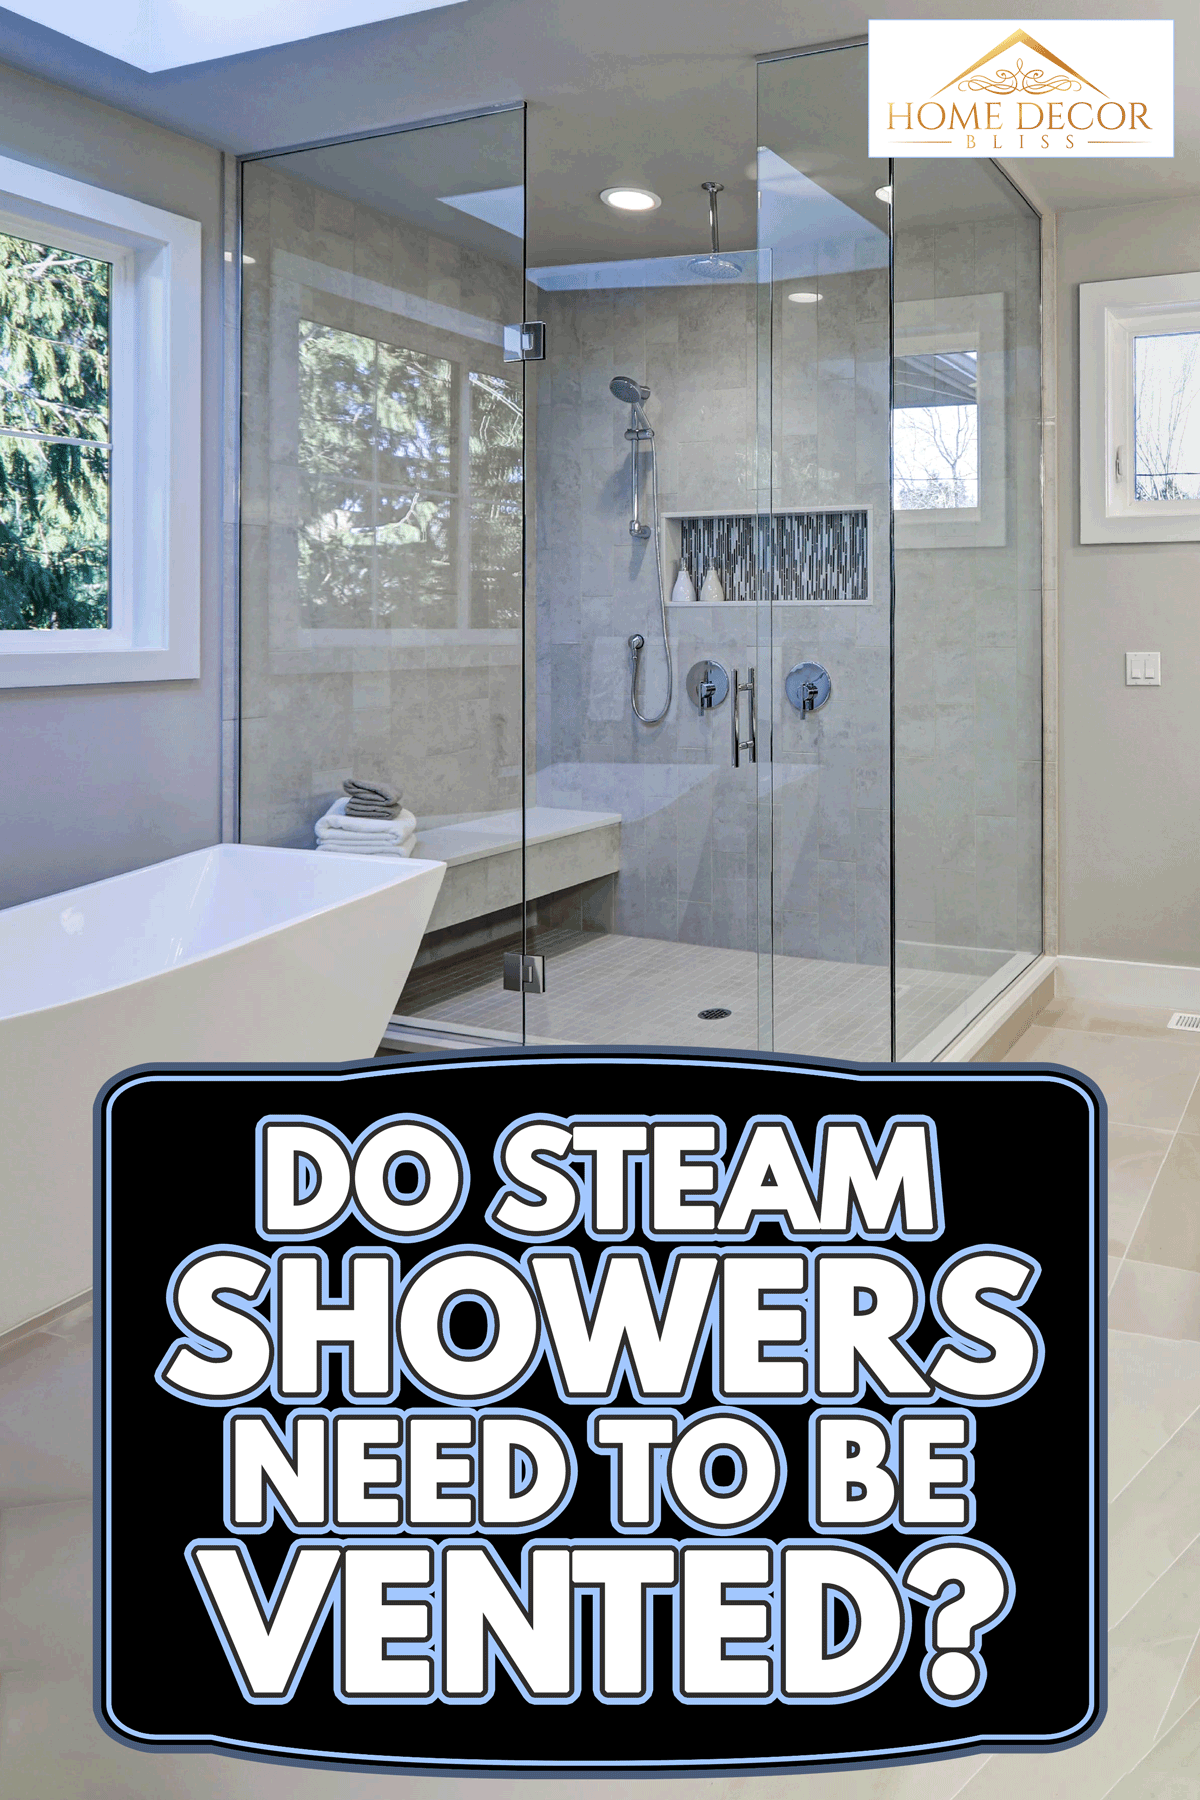 A spacious bathroom in gray tones with heated floors and walk-in shower, Do Steam Showers Need To Be Vented?